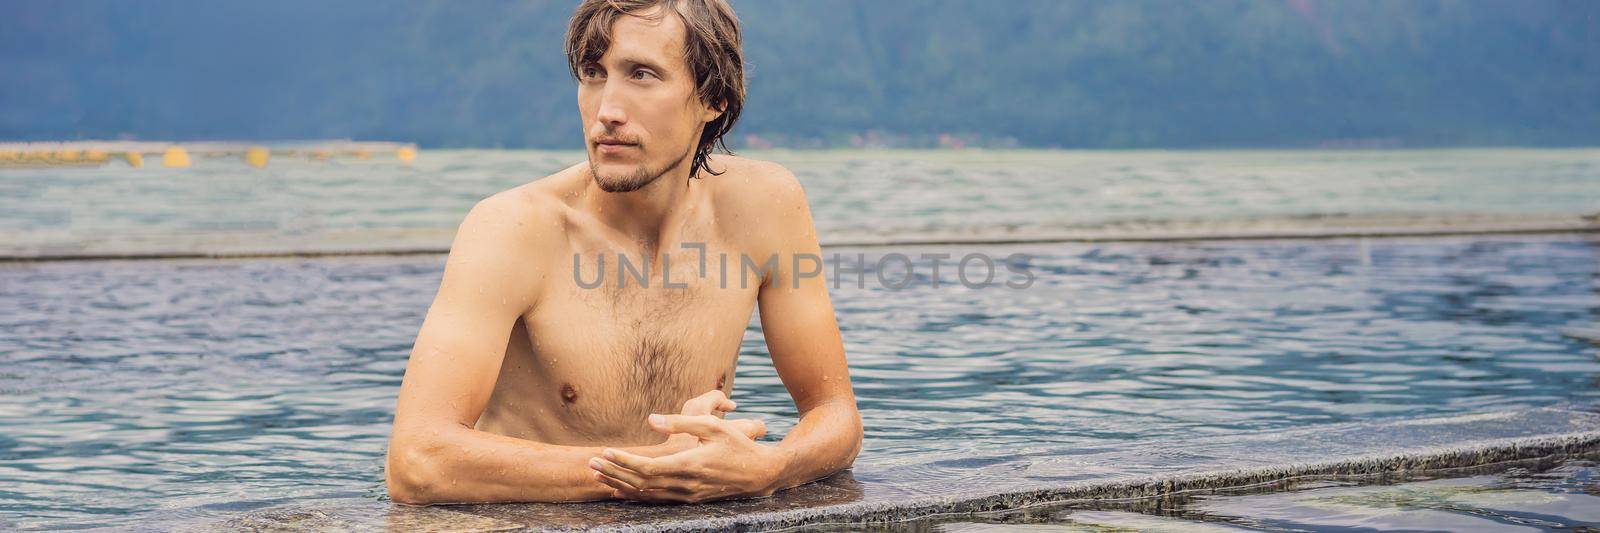 Geothermal spa. Man relaxing in hot spring pool. Young man enjoying bathing relaxed in a blue water lagoon, tourist attraction BANNER, LONG FORMAT by galitskaya